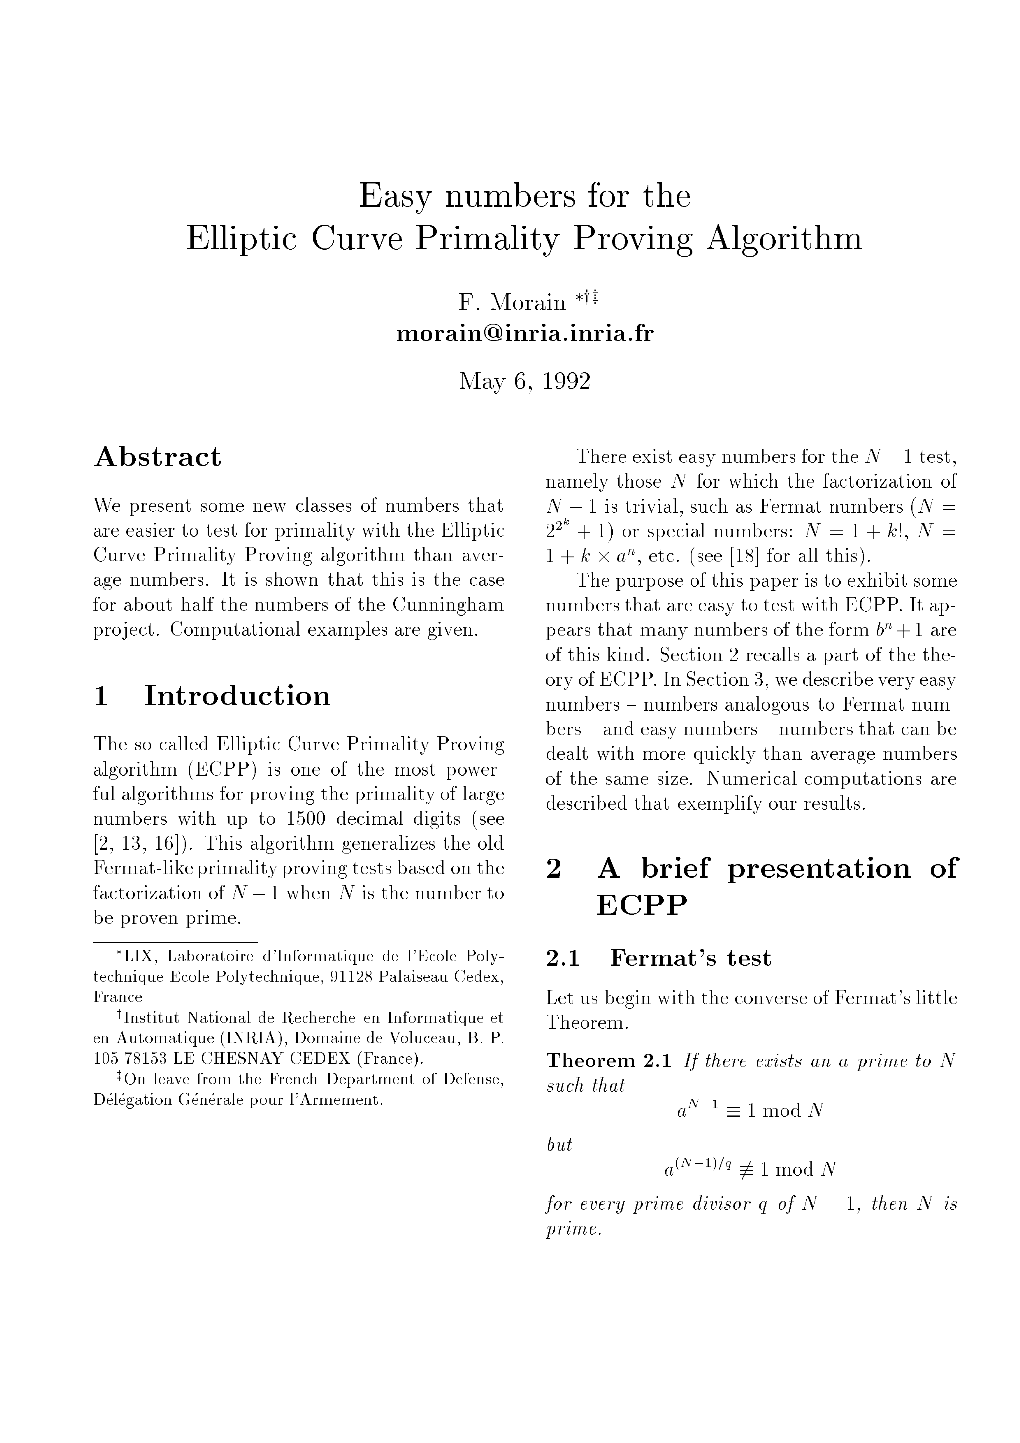 Easy Numbers for the Elliptic Curve Primality Proving Algorithm